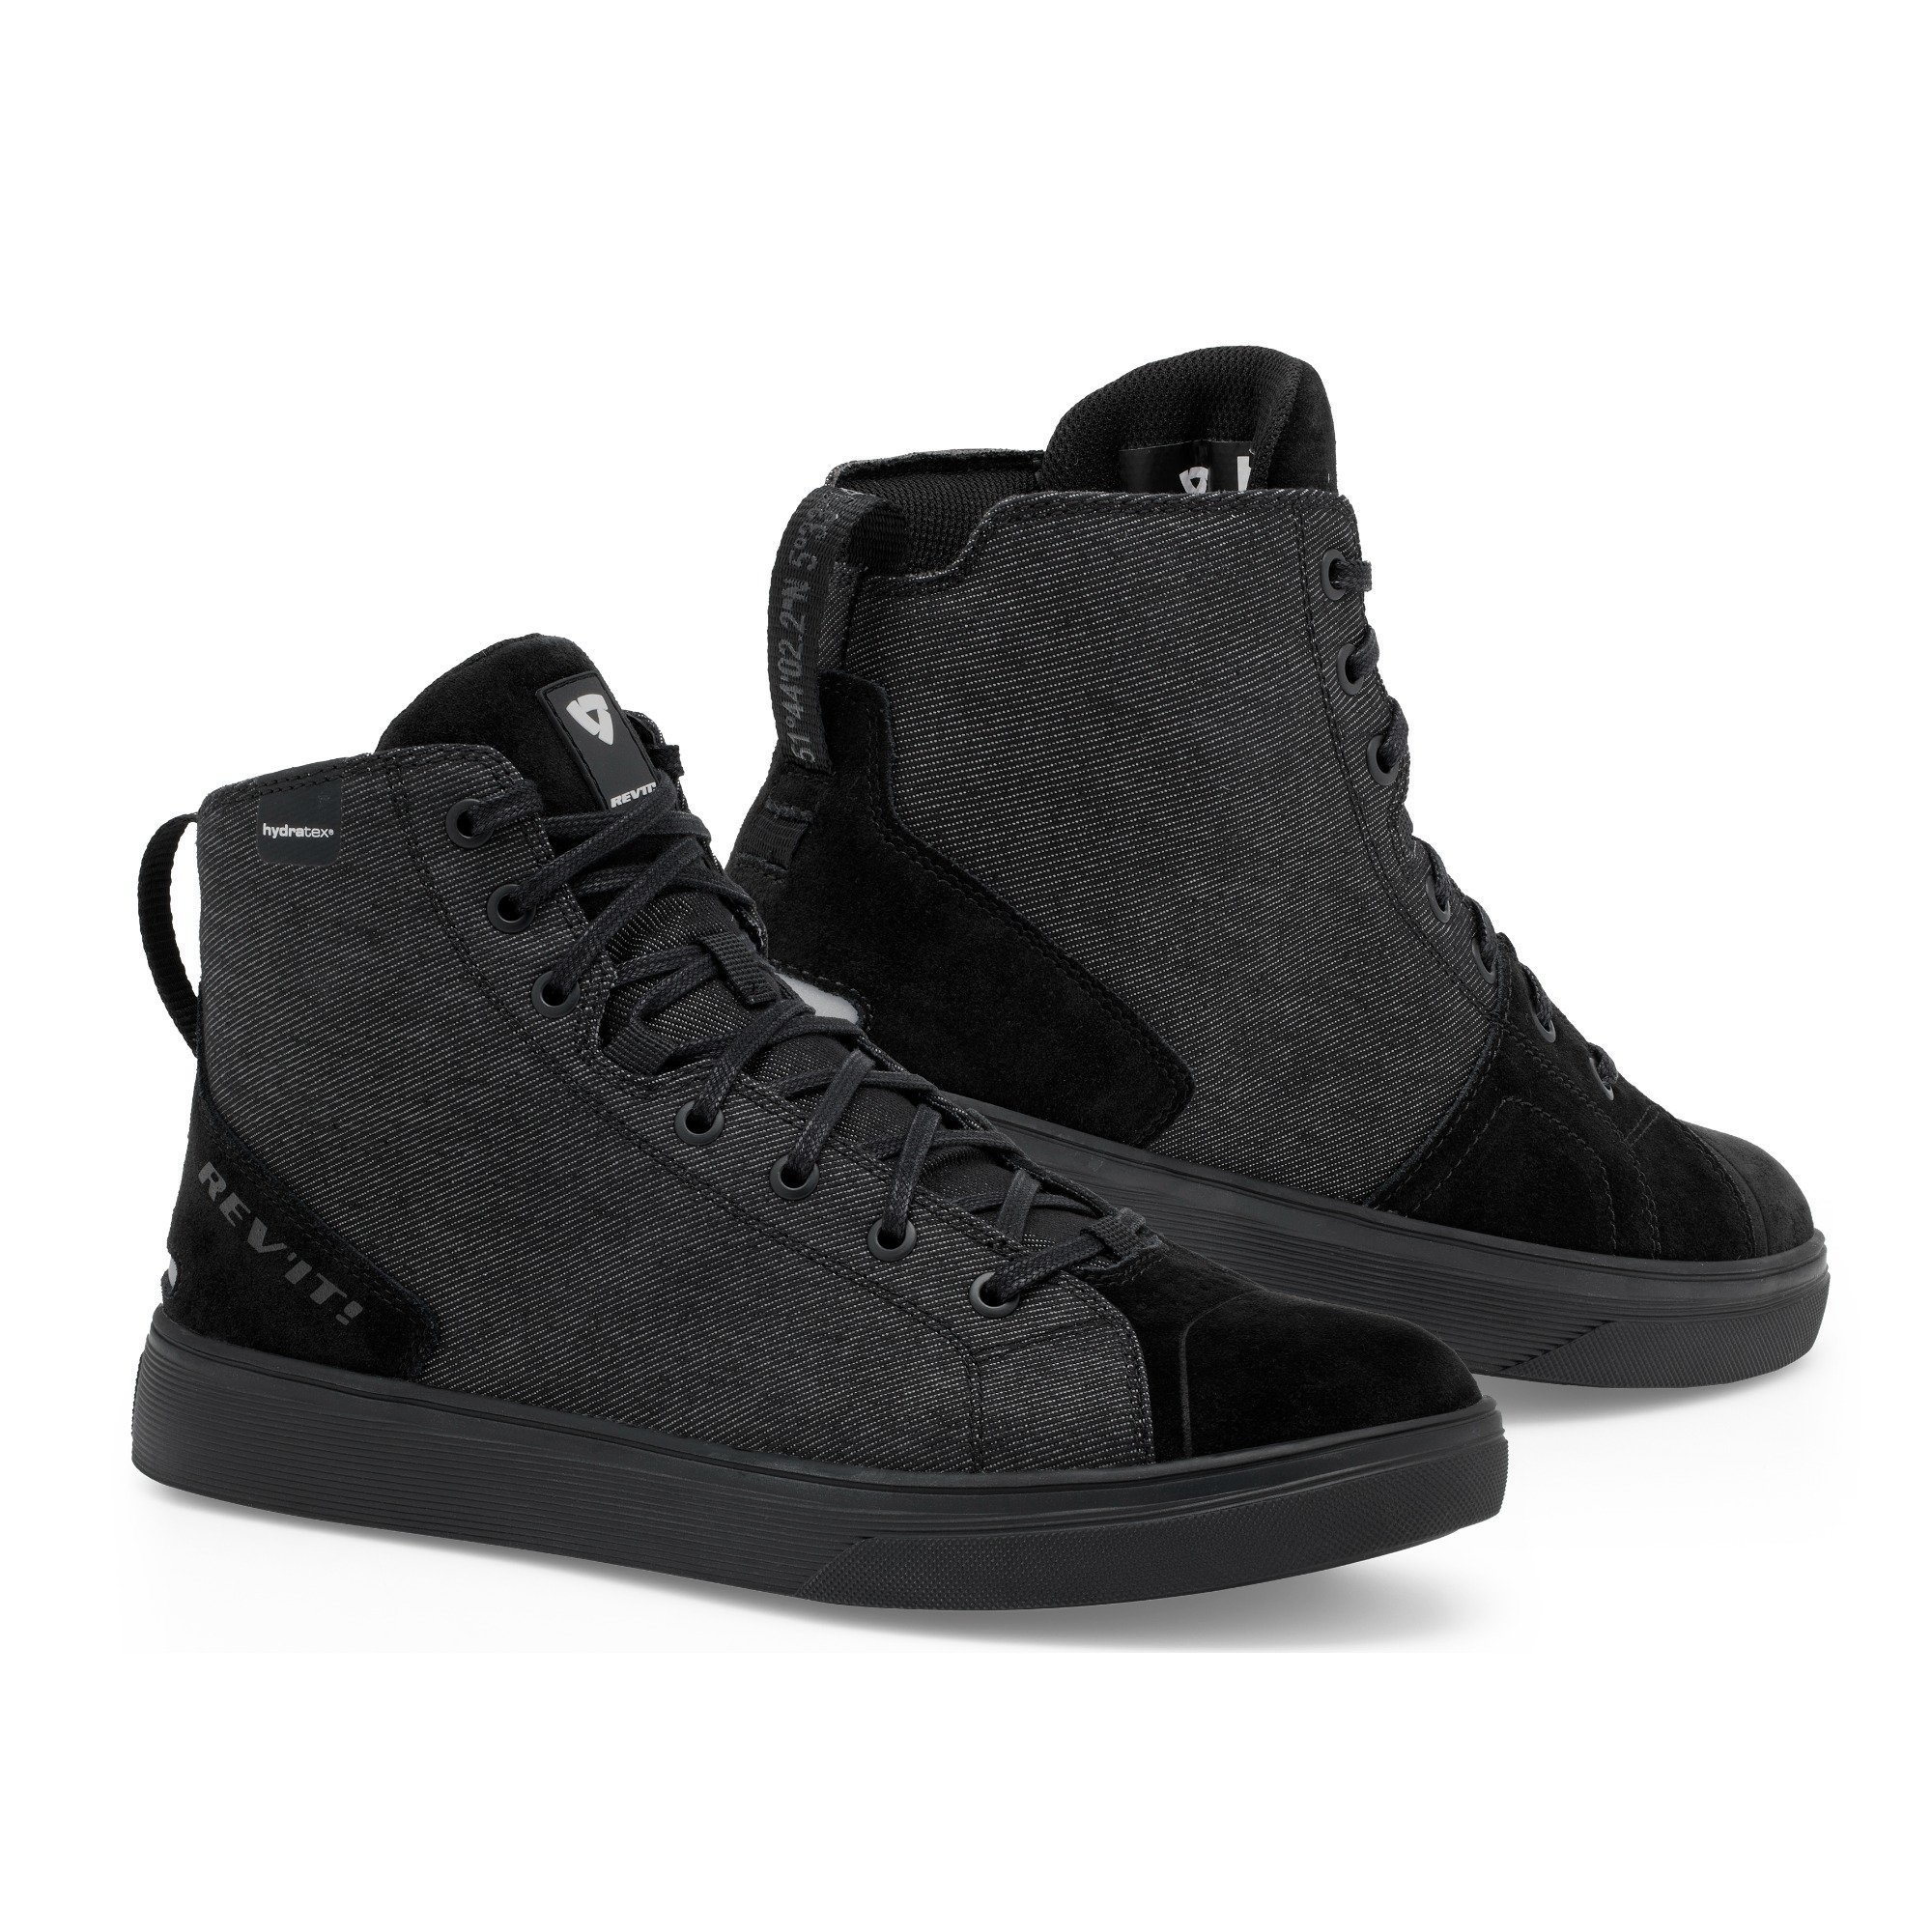 Image of REV'IT! Delta H2O Shoes Black Size 44 ID 8700001356381